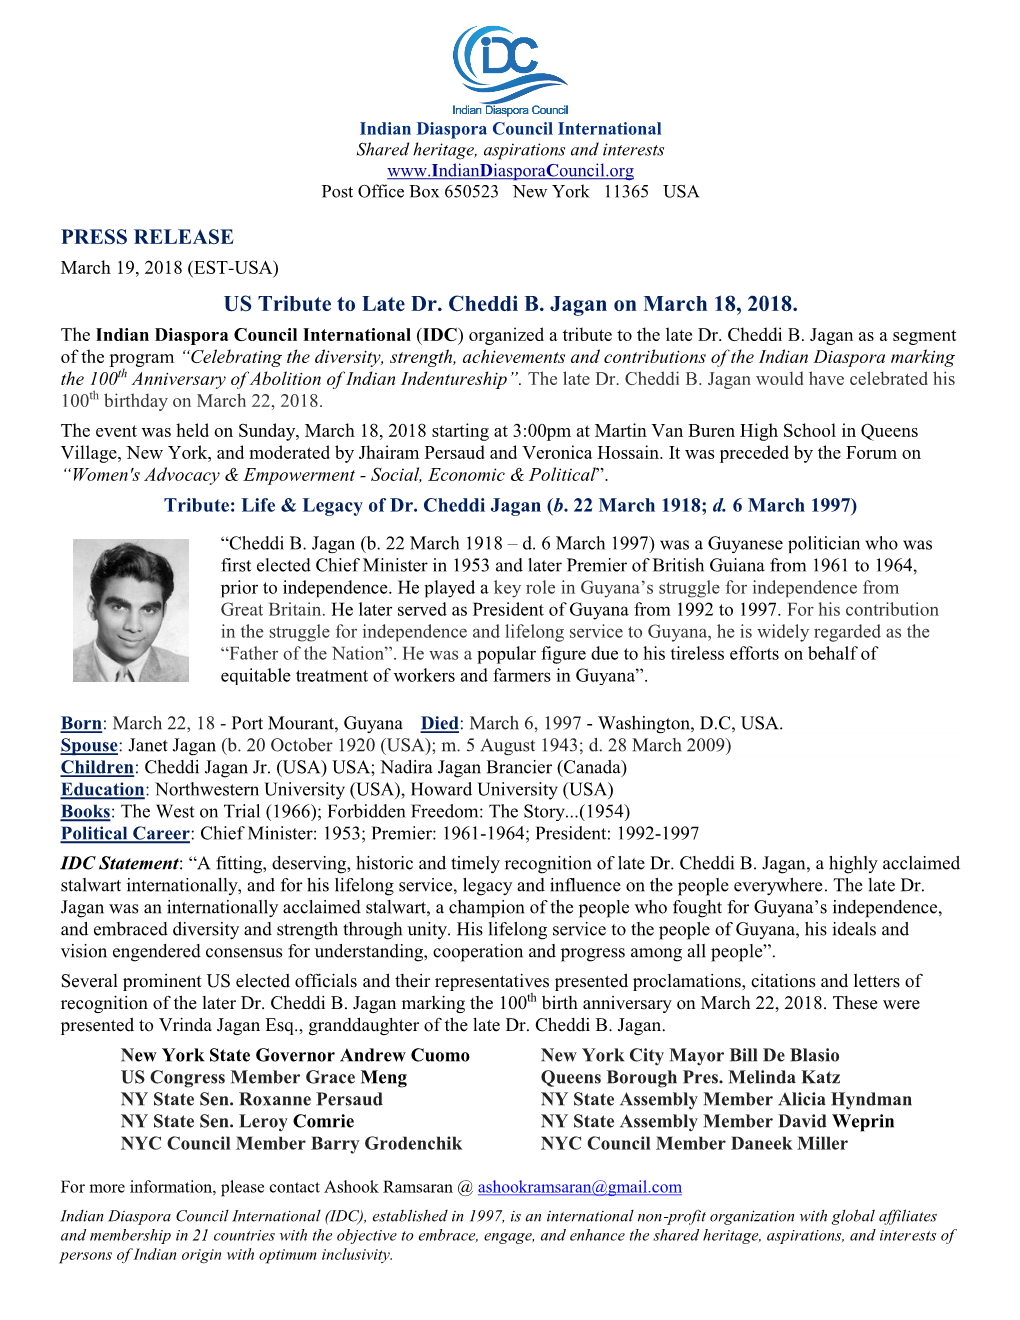 US Tribute to Late Dr. Cheddi B. Jagan on March 18, 2018